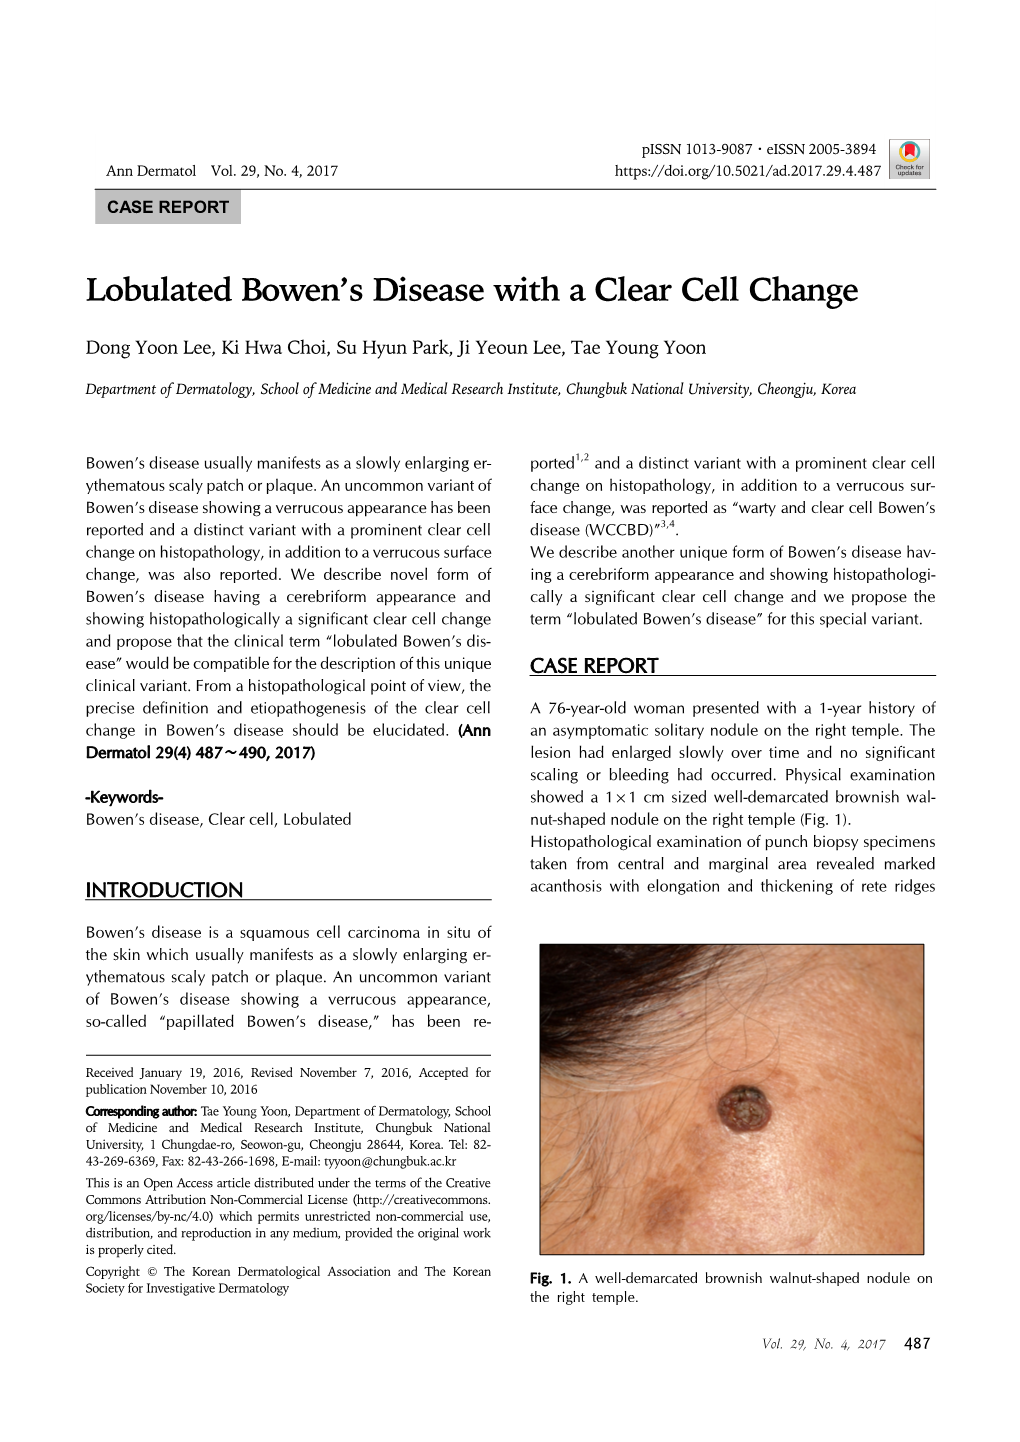 Lobulated Bowen's Disease with a Clear Cell Change